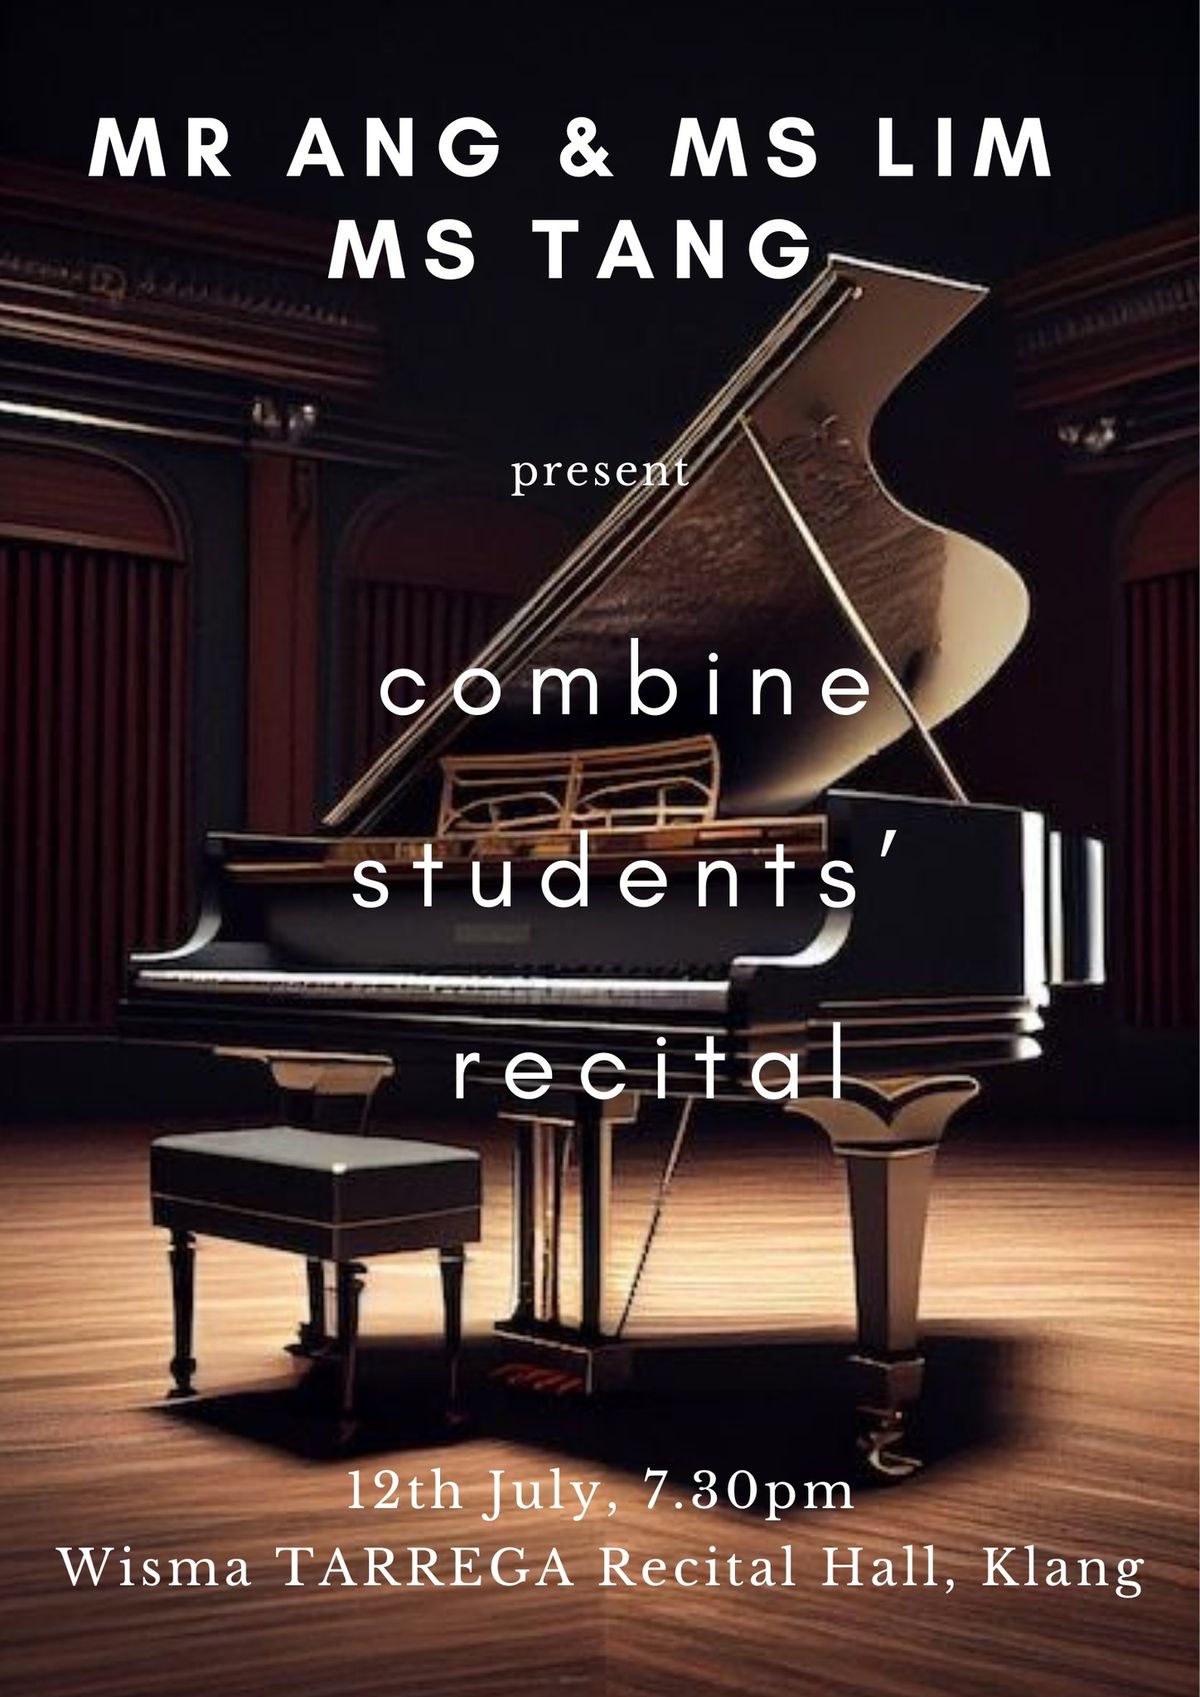 Mr Ang, Ms Lim and Ms Tang presents a combined student recital